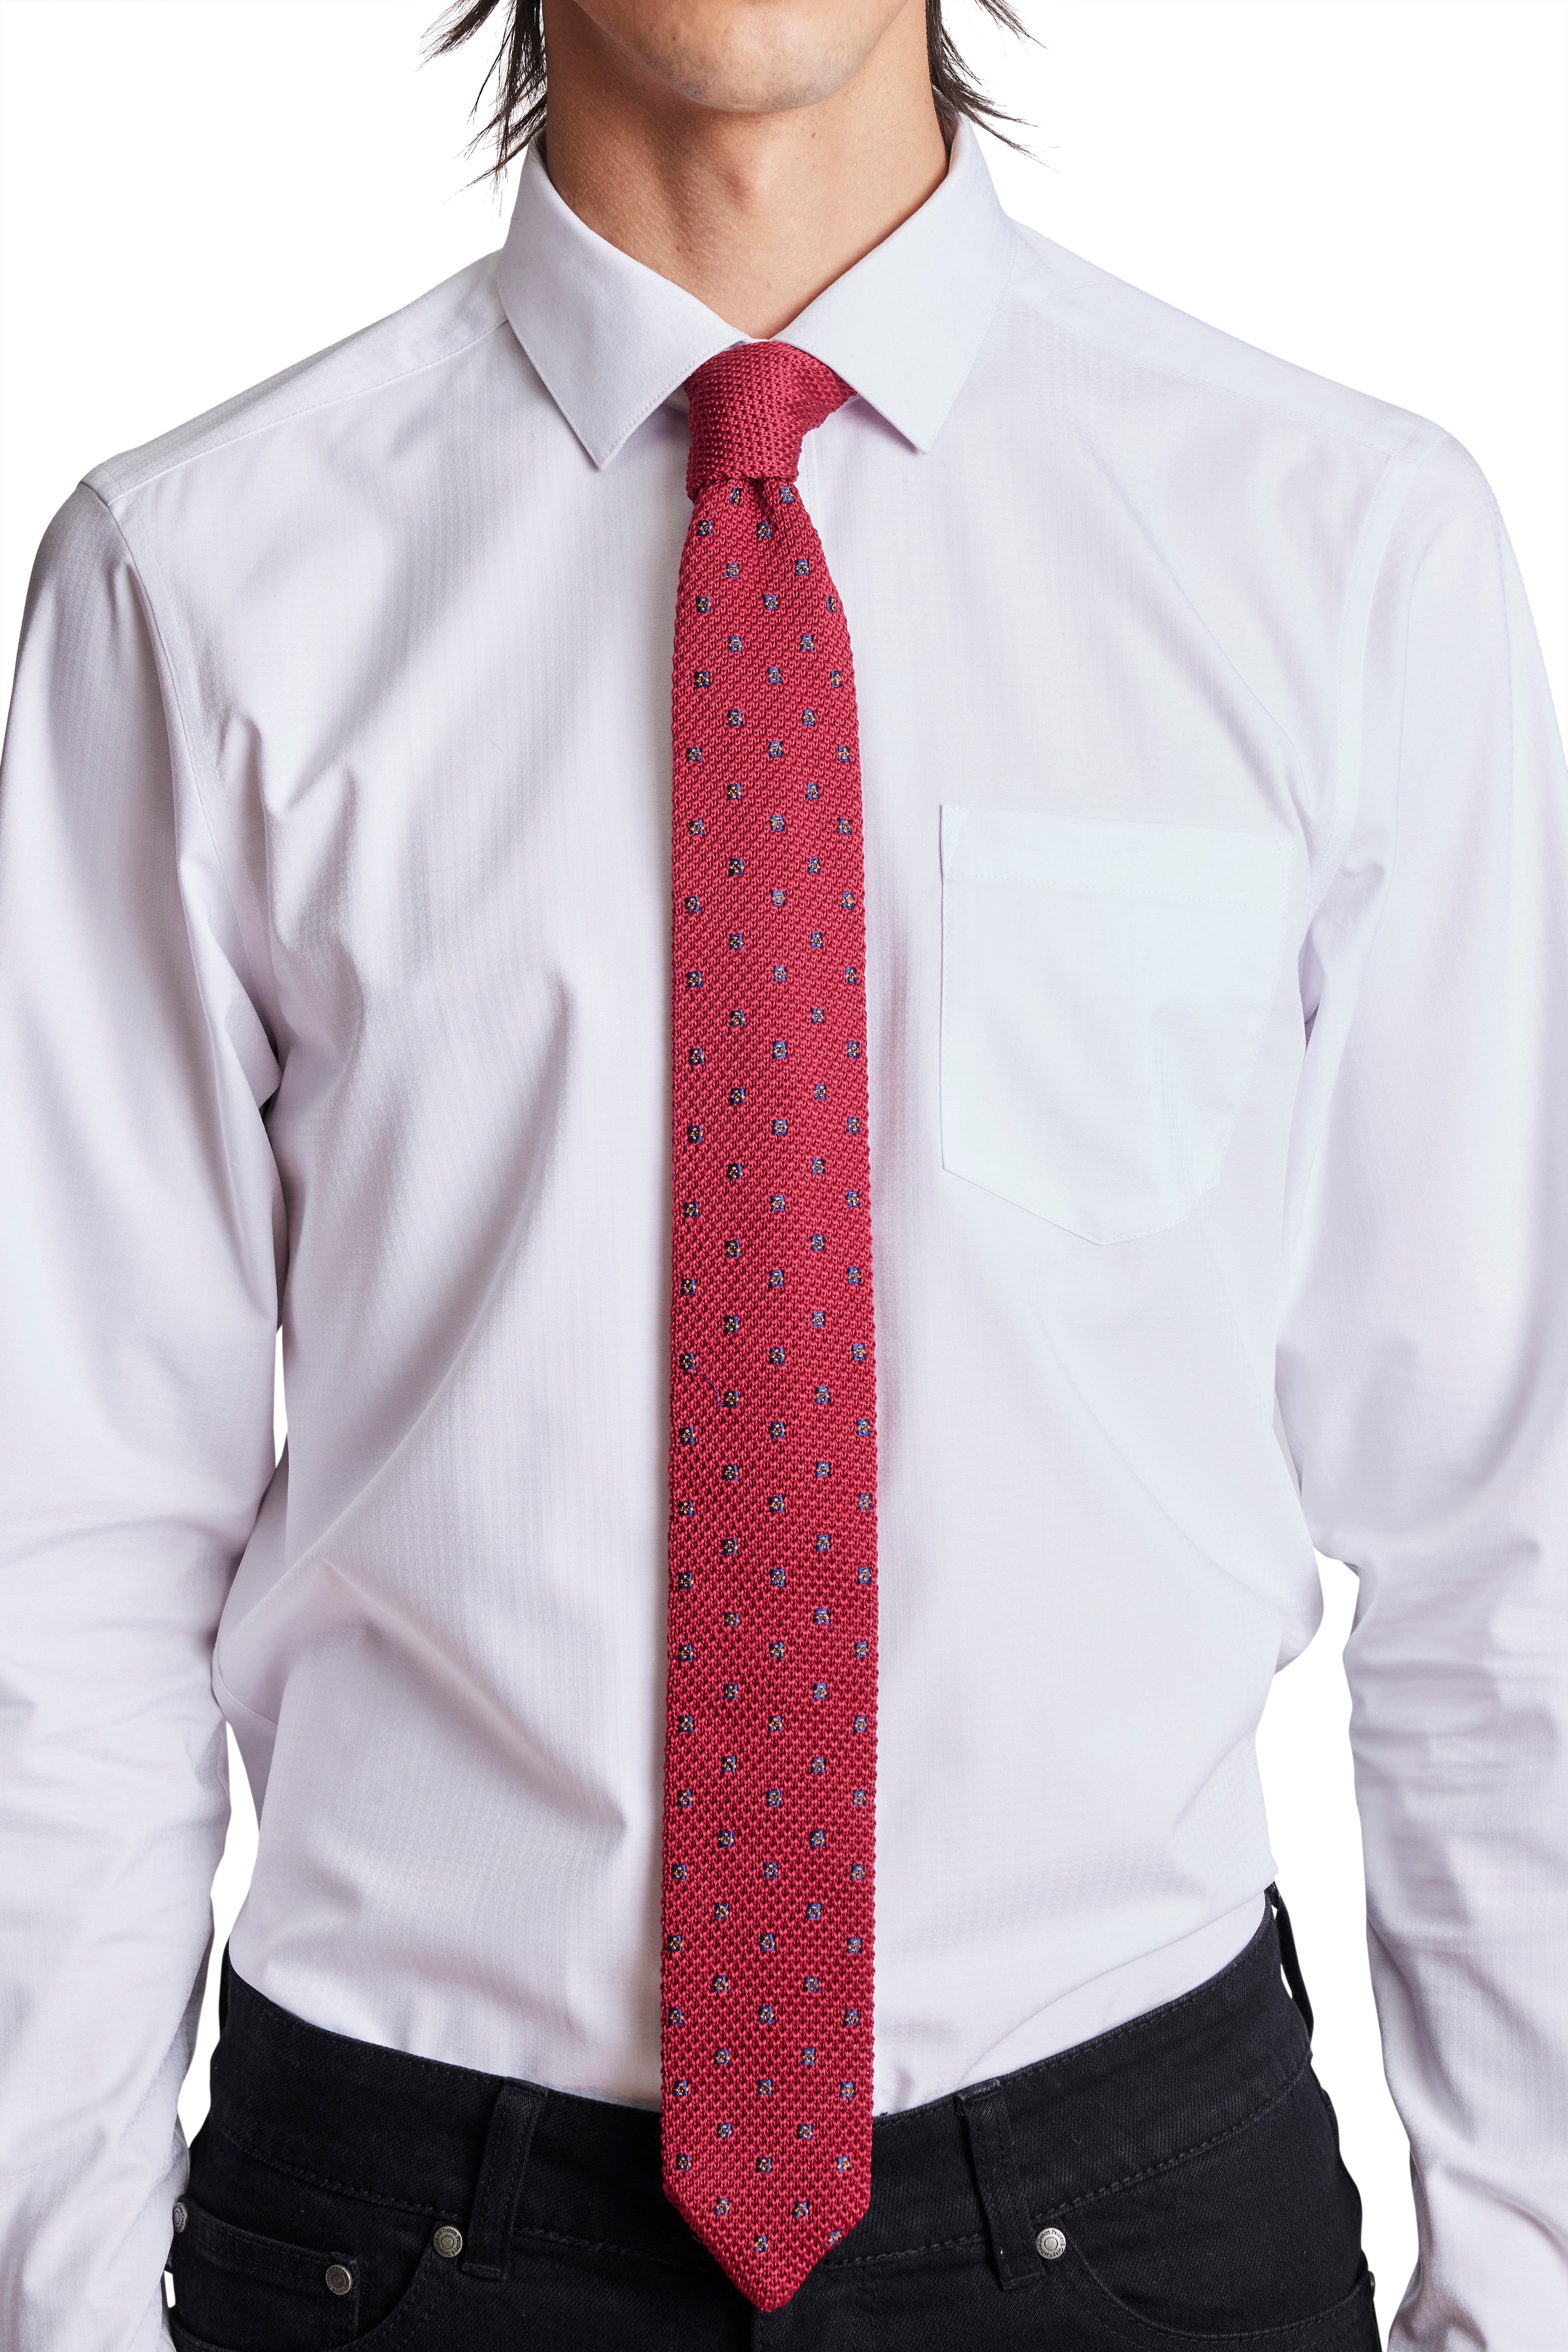 Stanley Micro Dot Knit Tie - Cranberry Crush